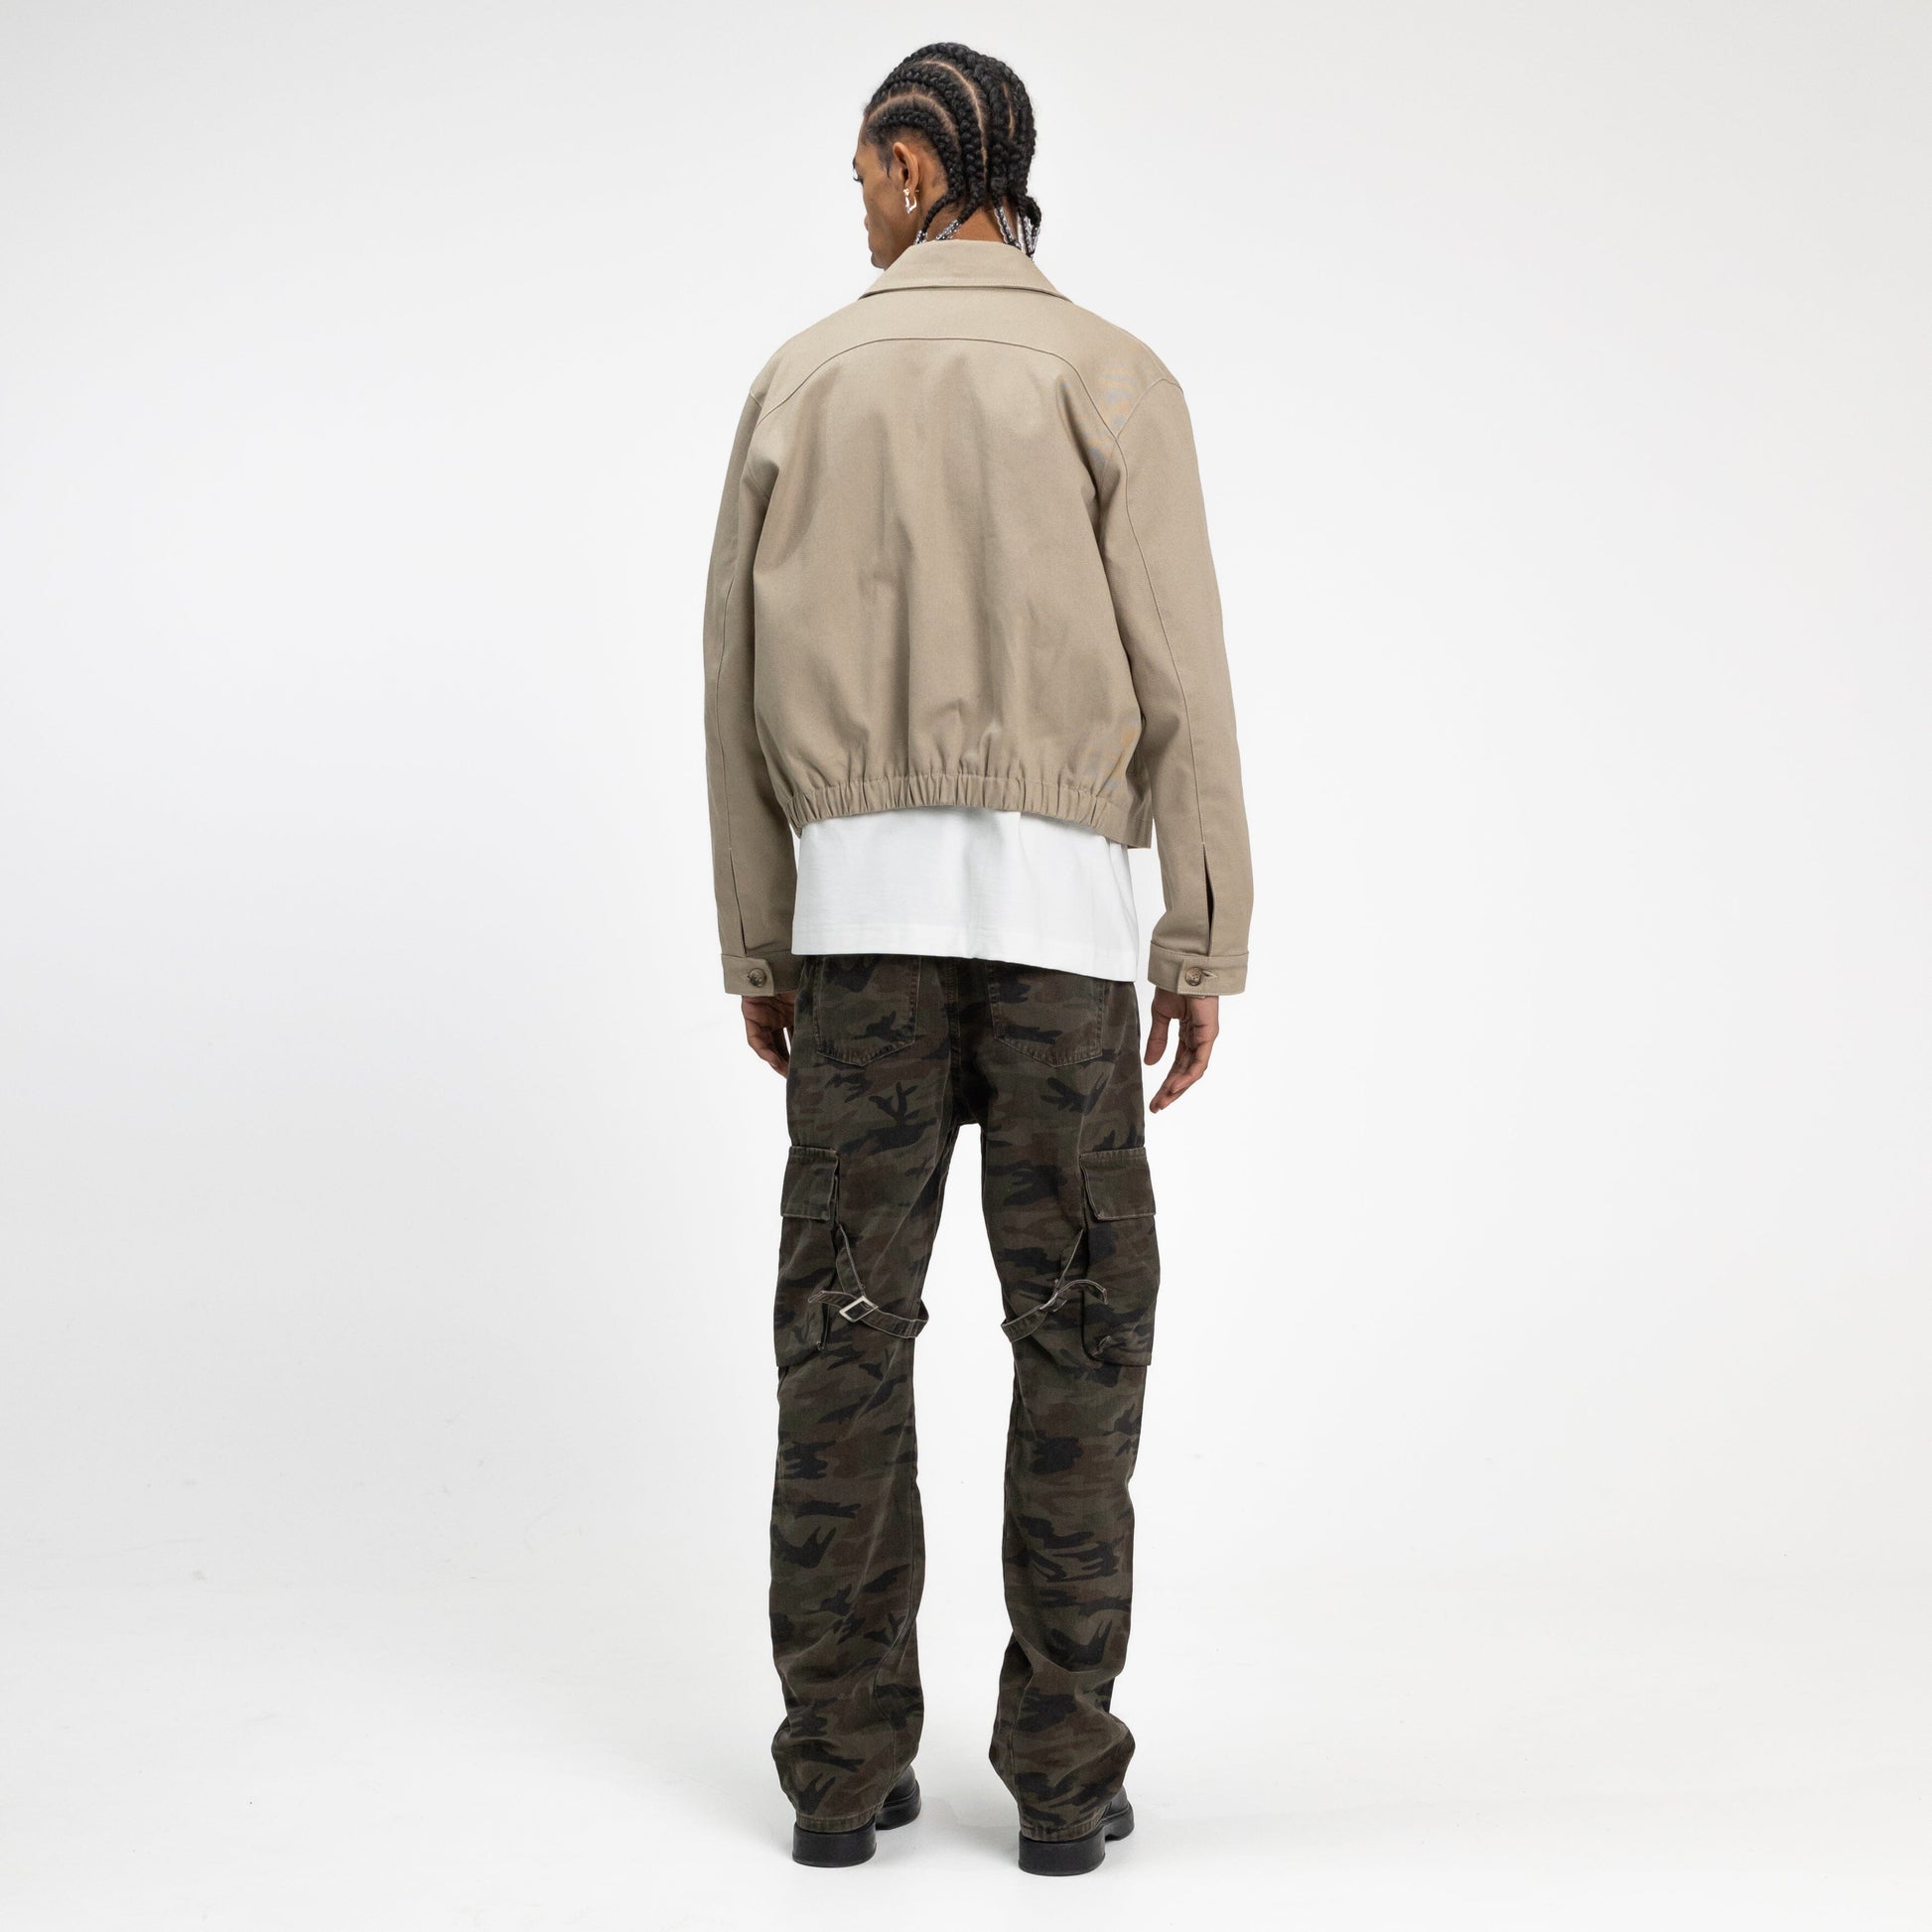 Strap Cargo Pants in Camo